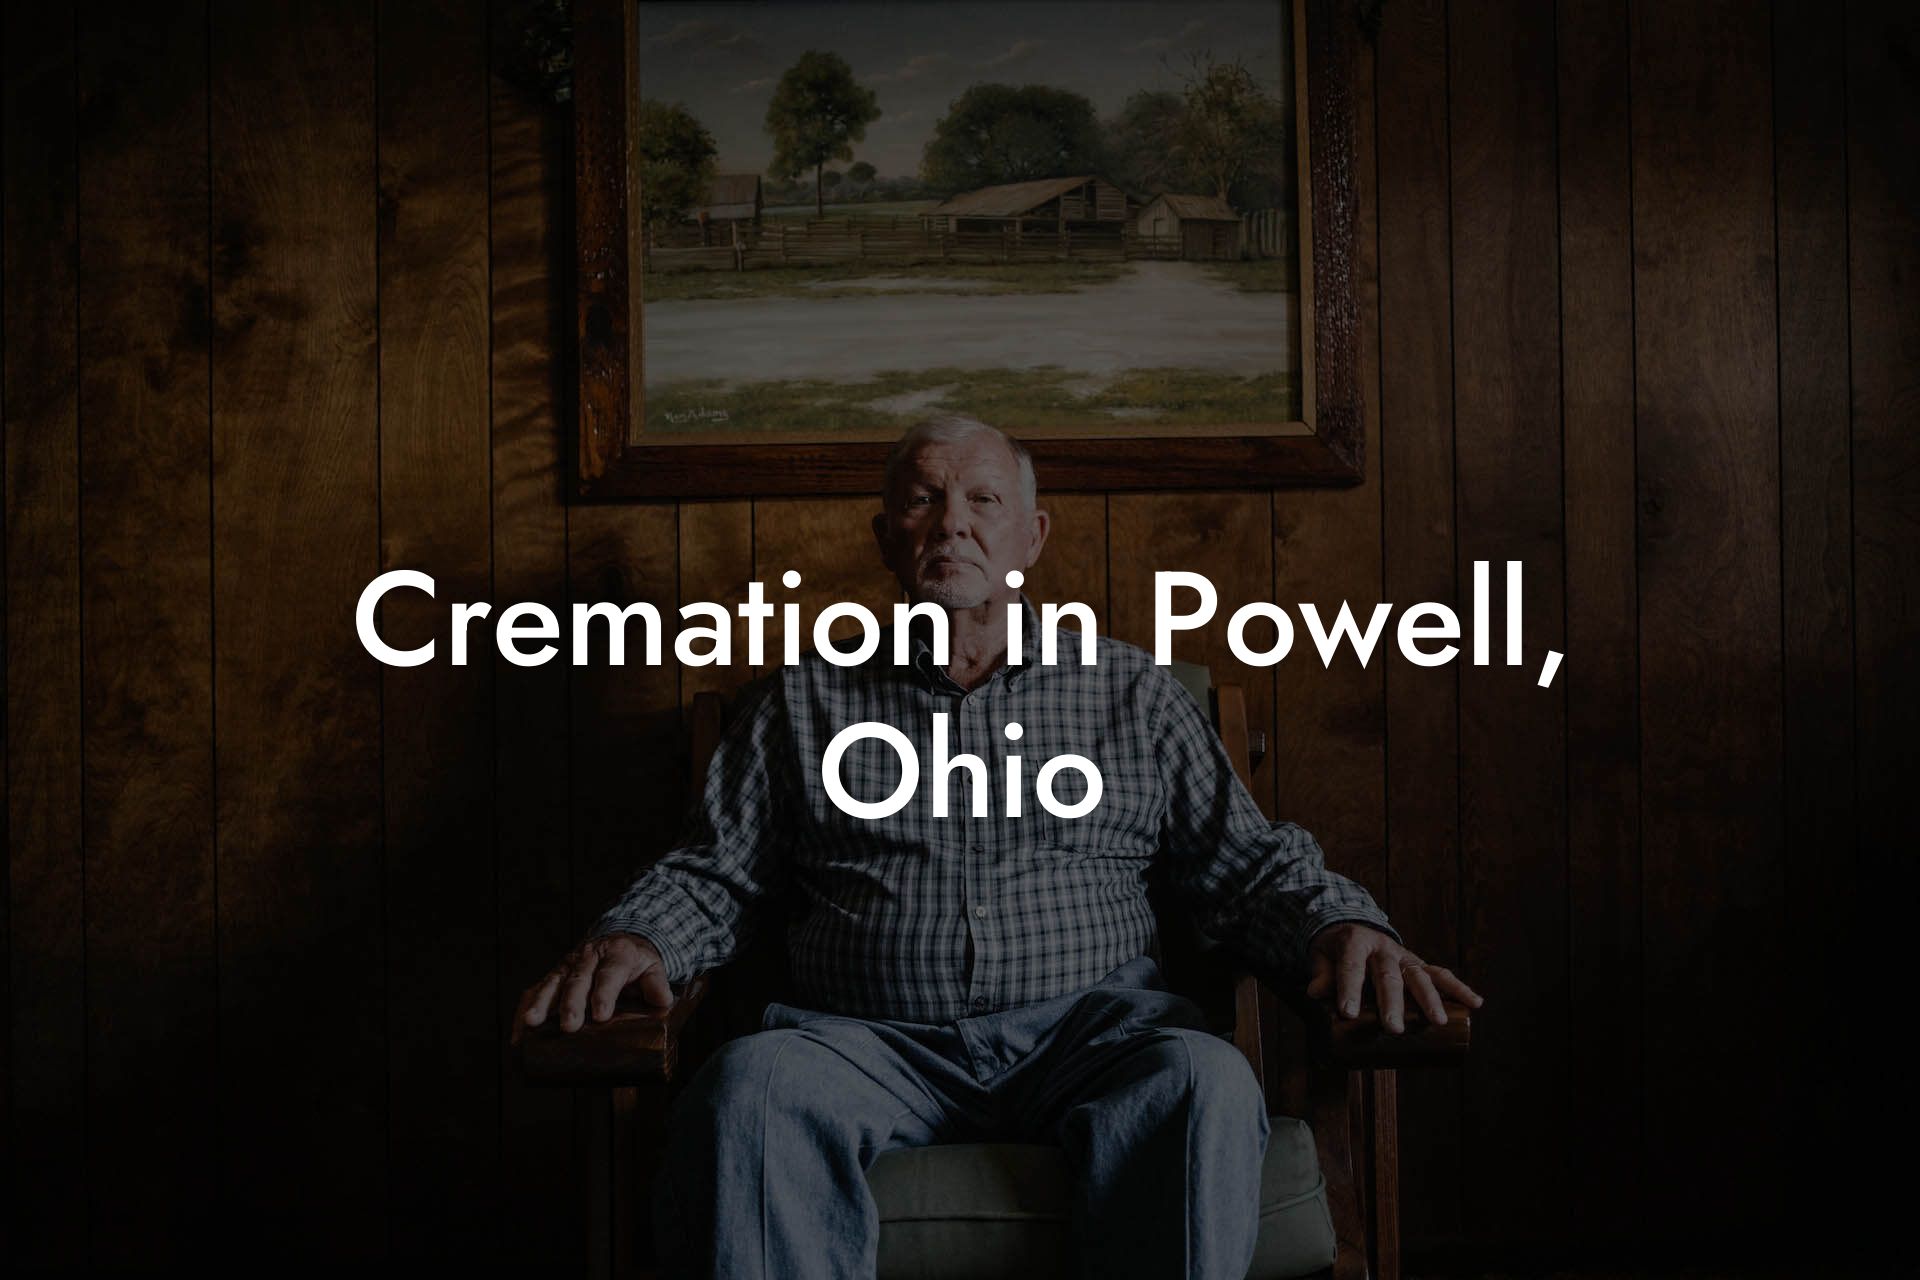 Cremation in Powell, Ohio